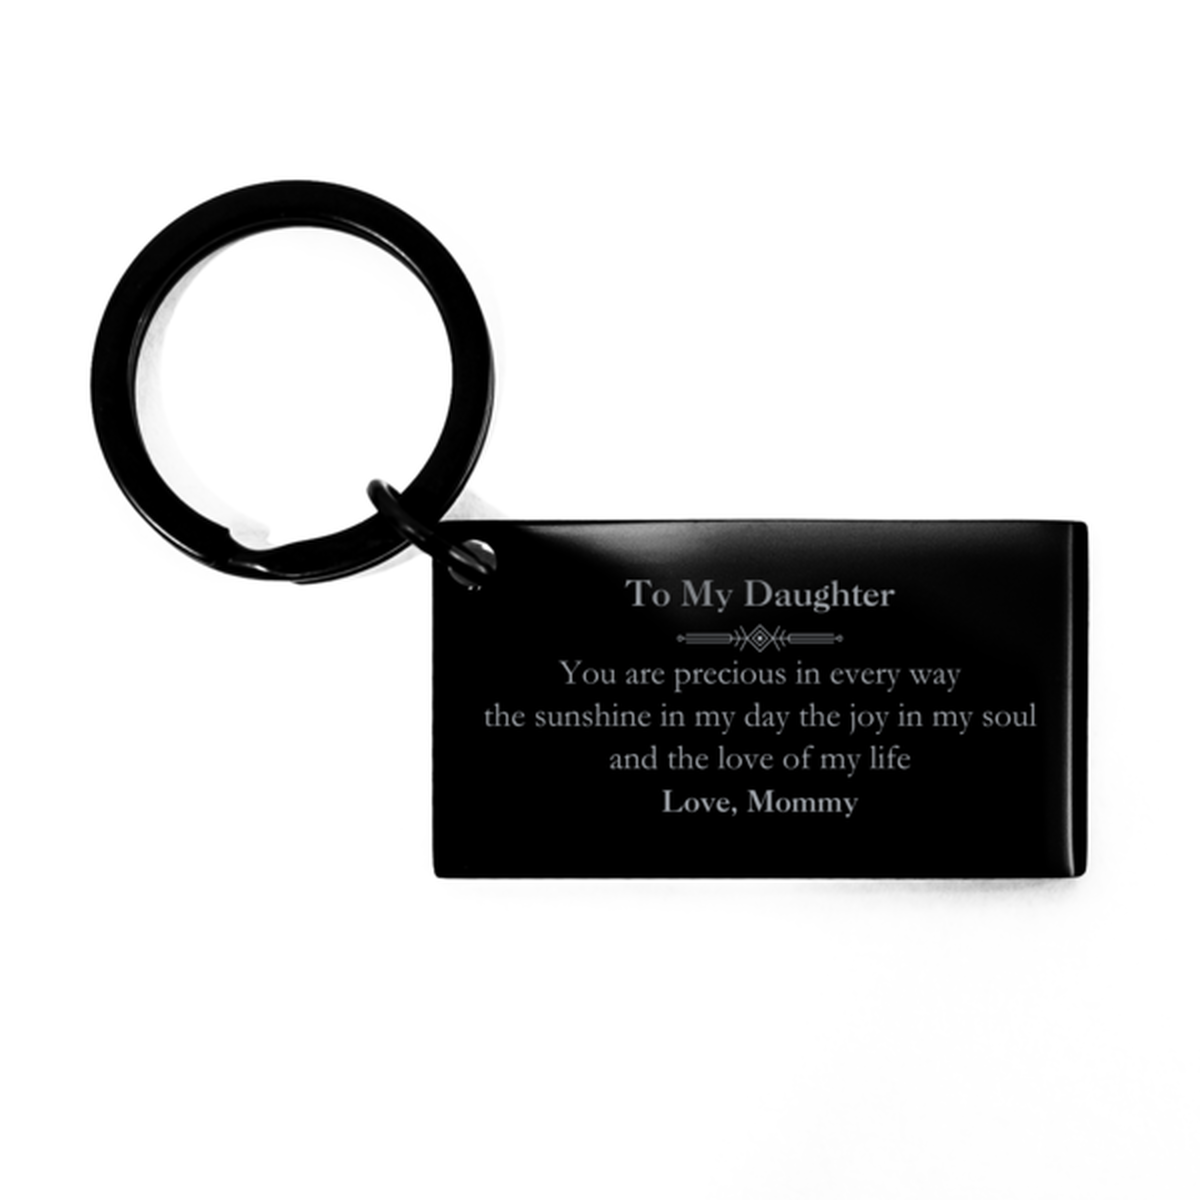 Graduation Gifts for Daughter Keychain Present from Mommy, Christmas Daughter Birthday Gifts Daughter You are precious in every way the sunshine in my day. Love, Mommy